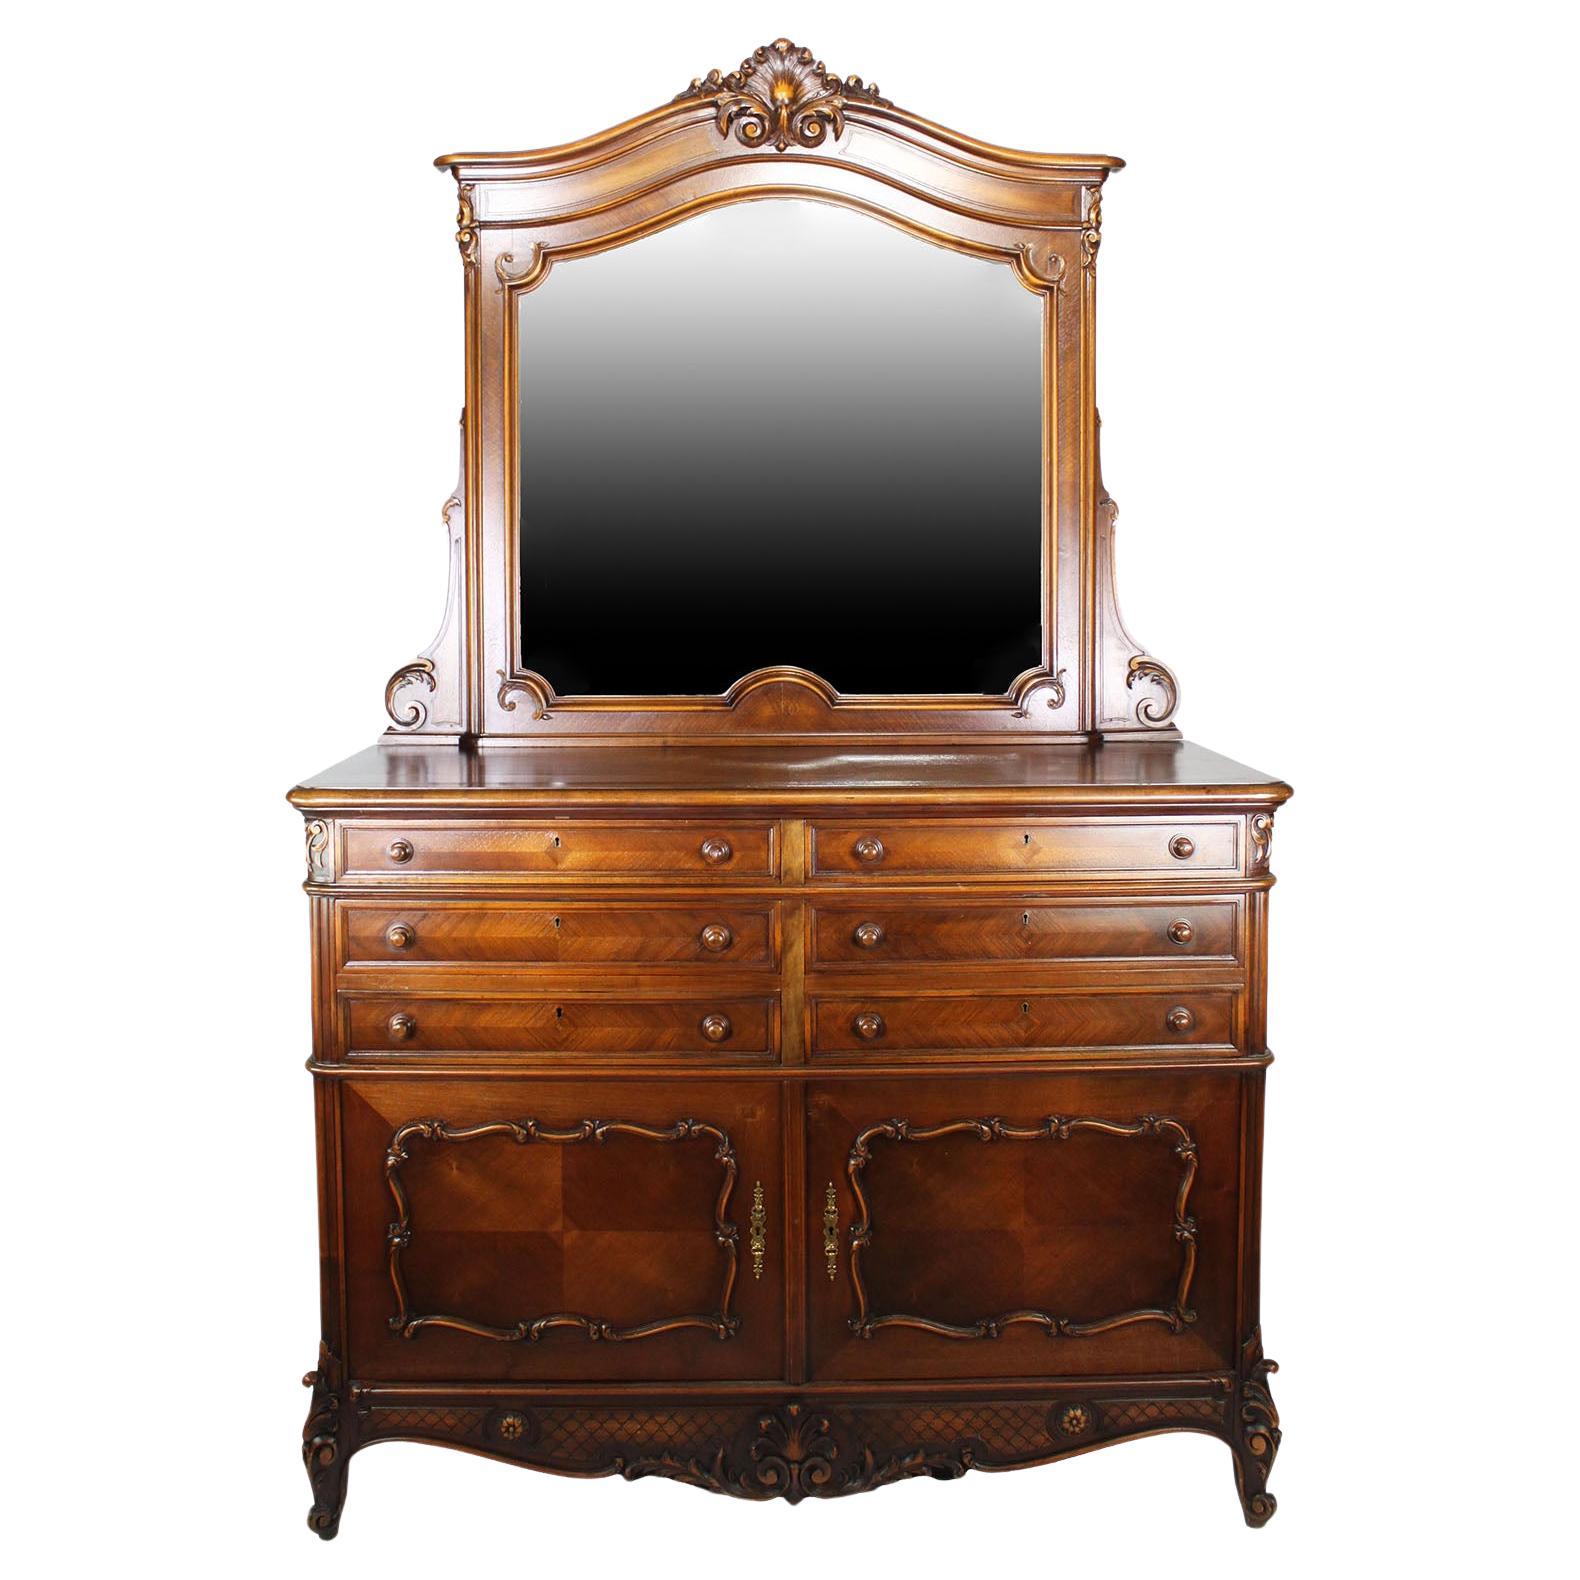 Country French 19th/20th Century Louis XV Provençal Style Carved Walnut Vanity